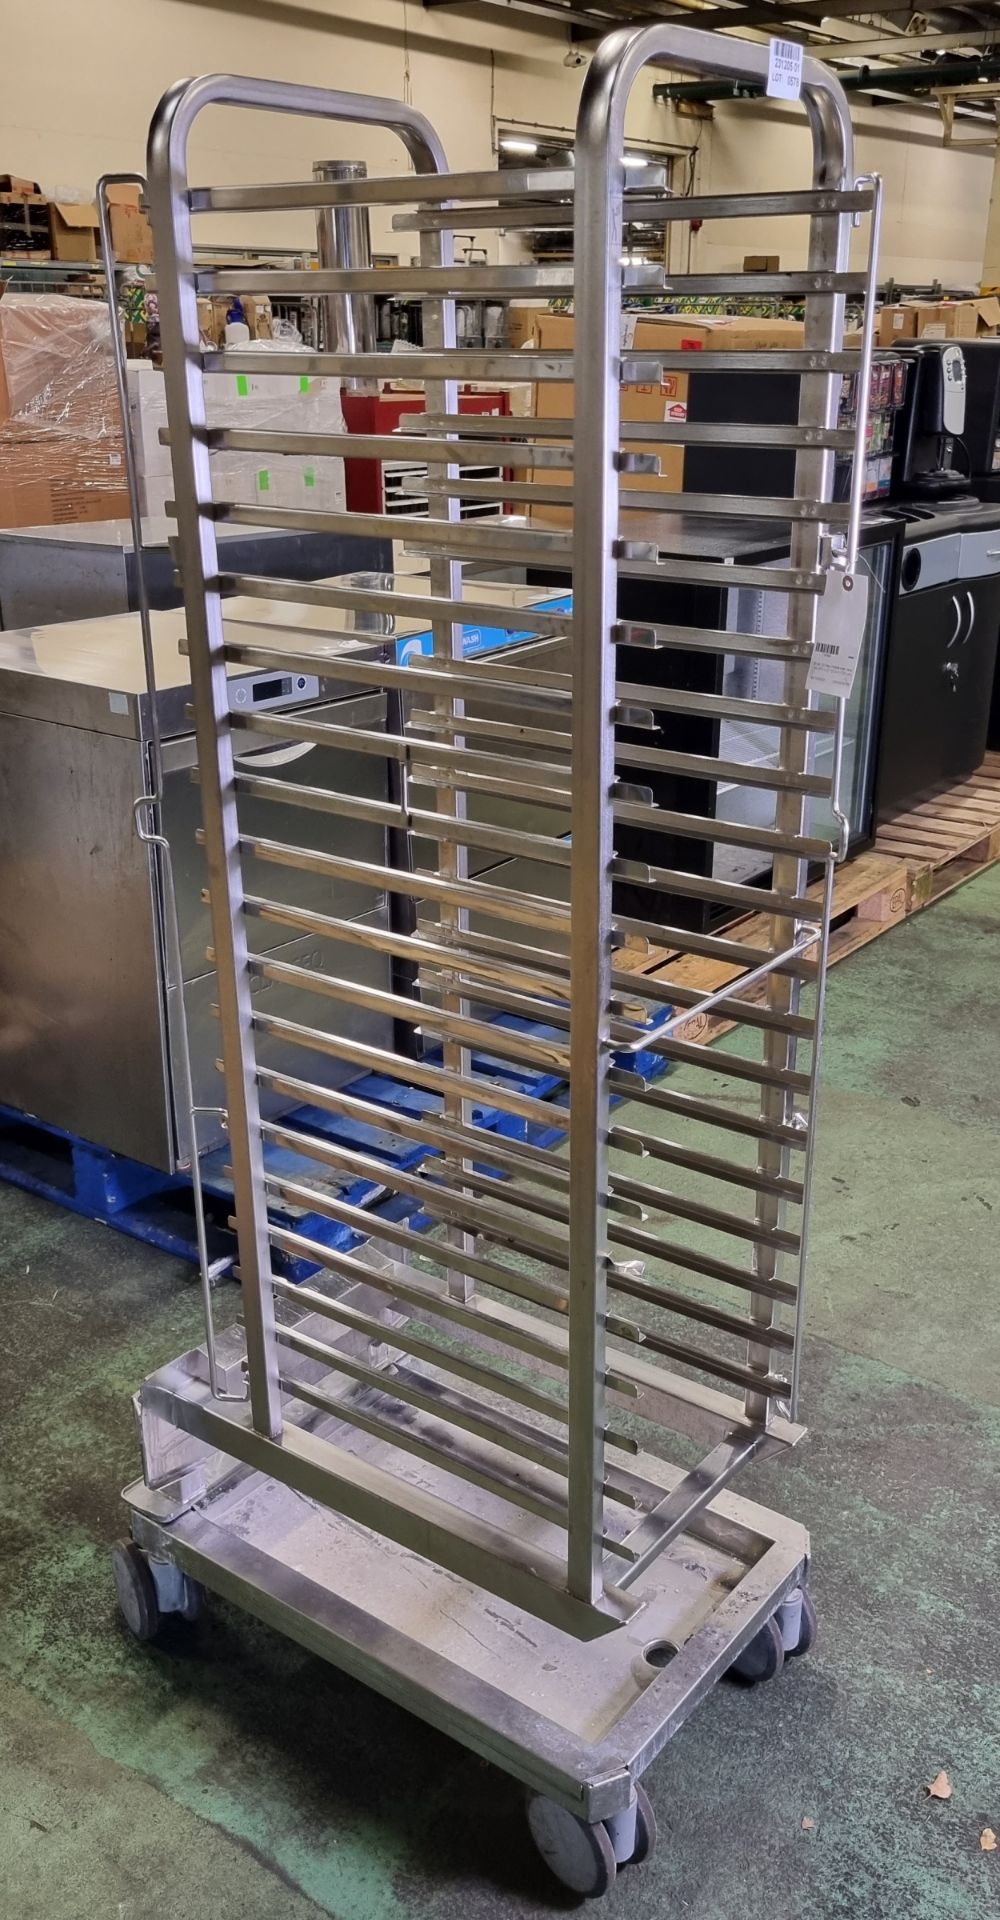 Stainless steel 20 tray mobile oven rack - W 470 x D 720 x H 1720mm - Image 3 of 3